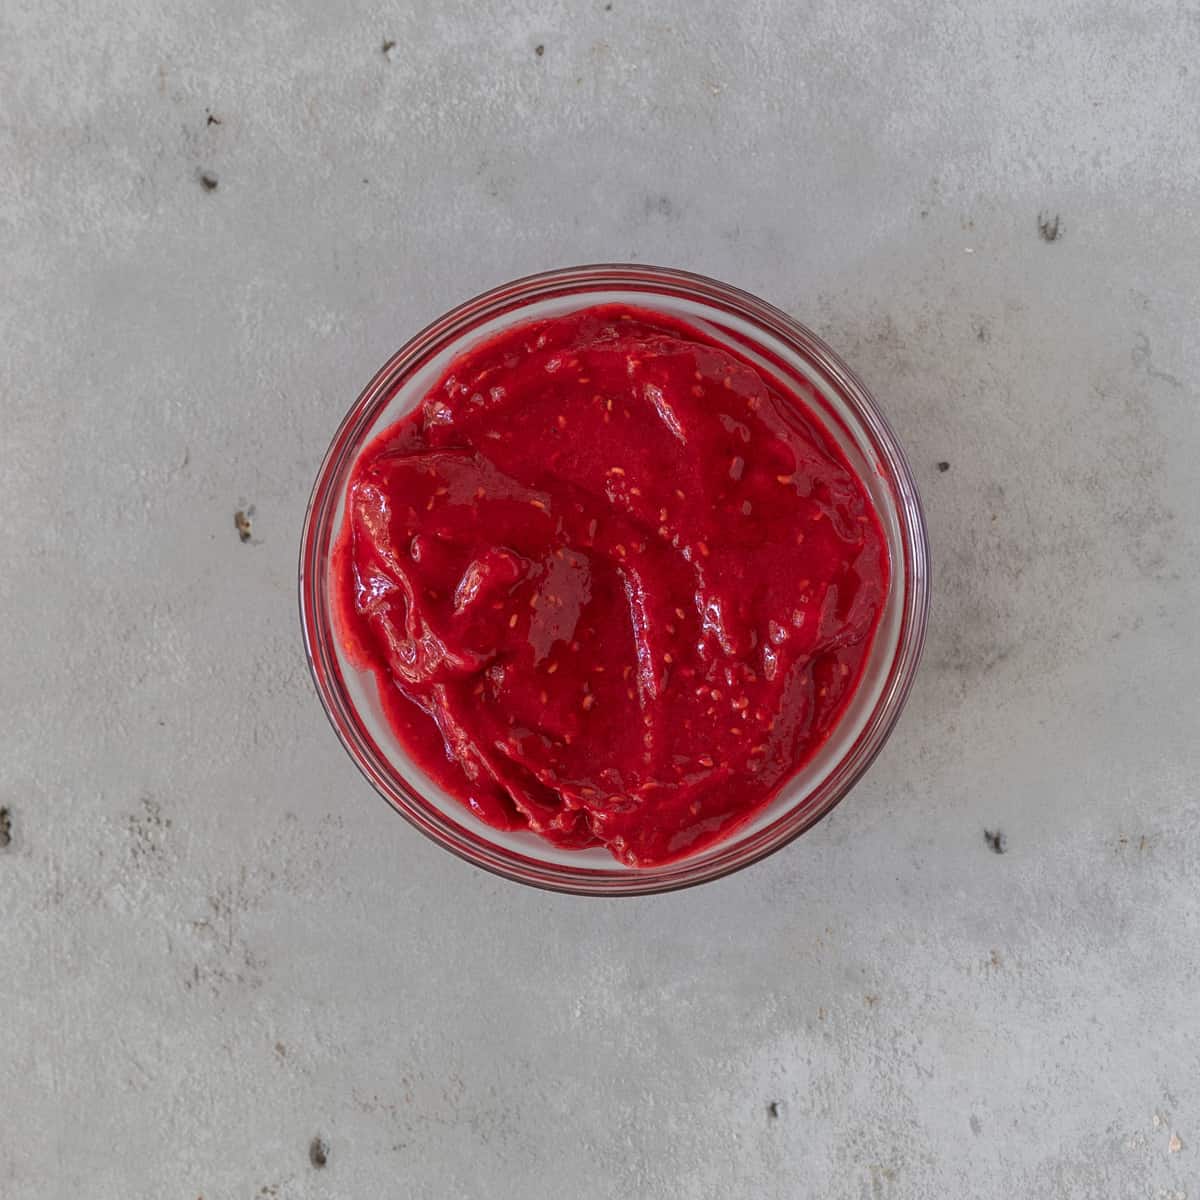 the raspberry sauce in a glass bowl on a grey background.